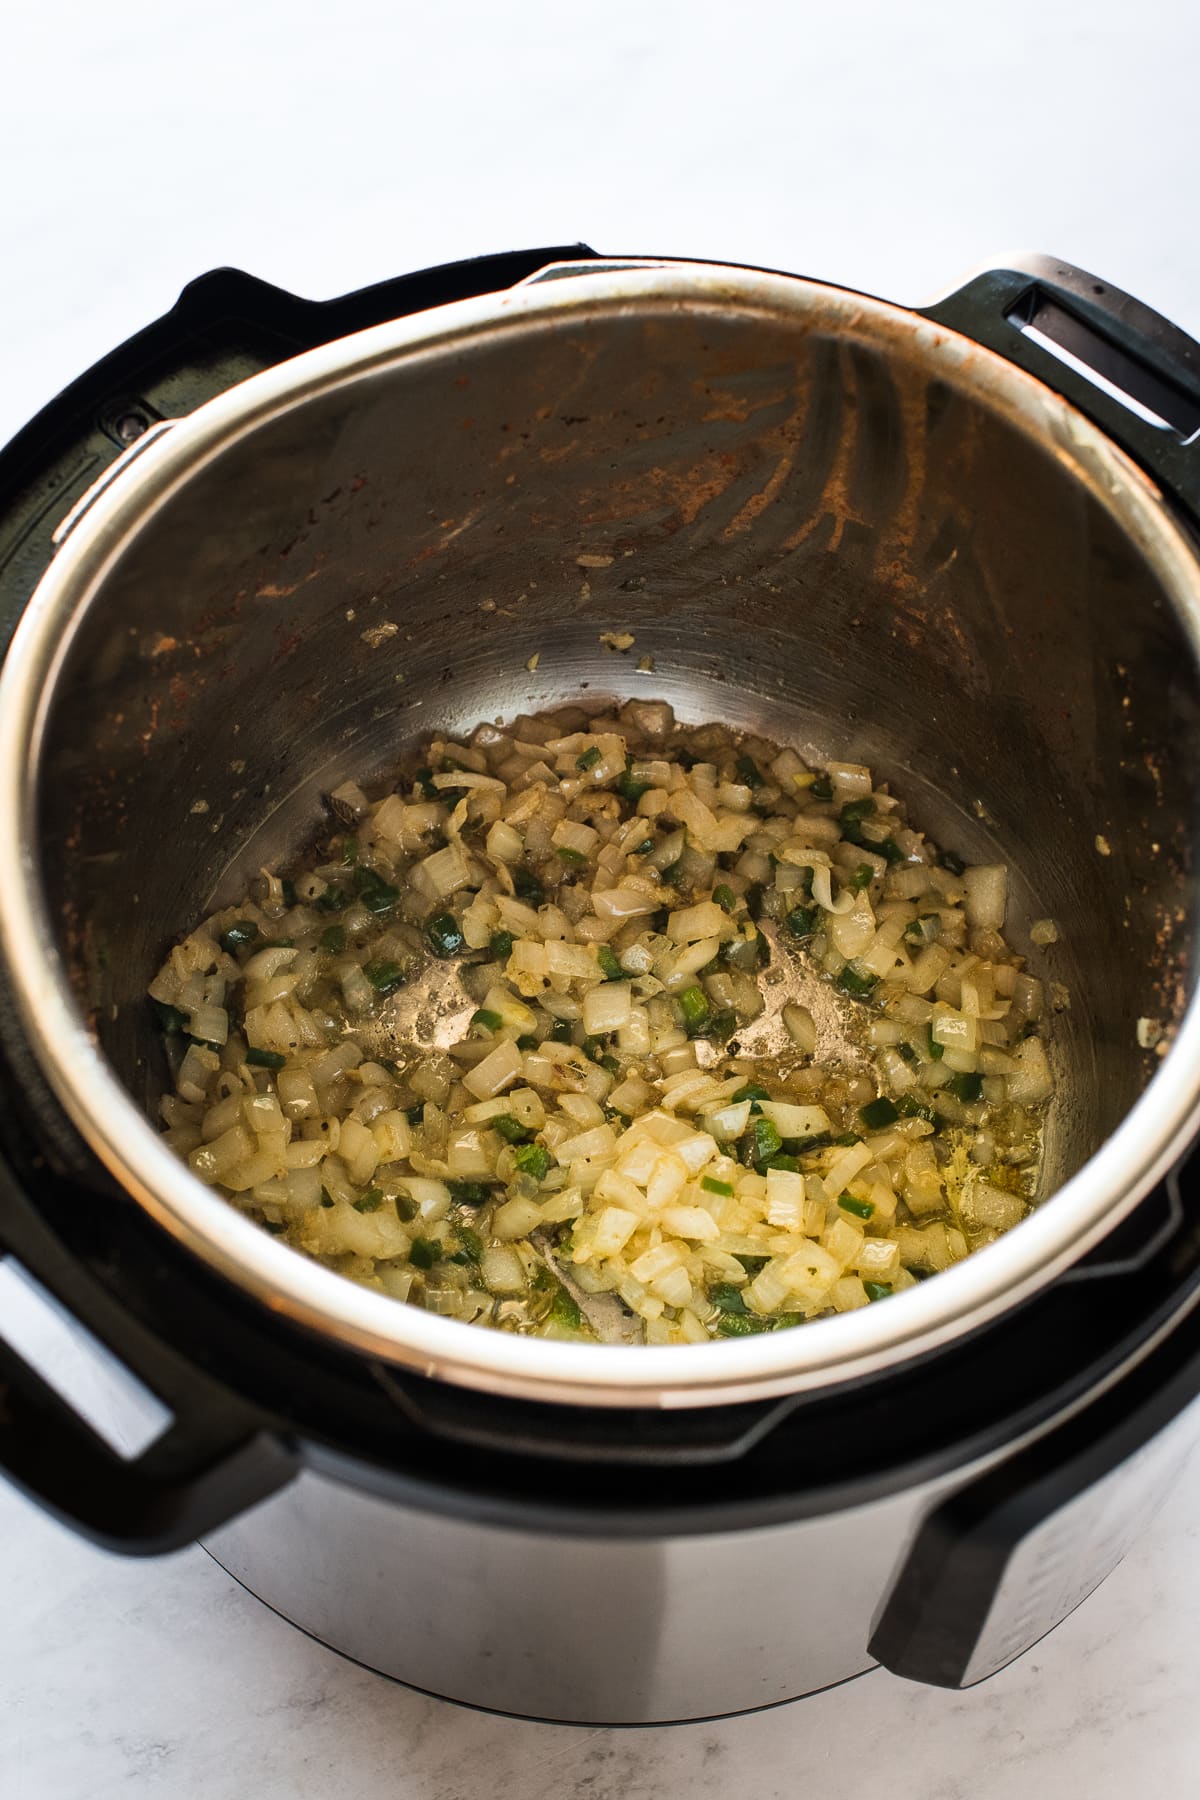 Sauteed onions, jalapenos, and garlic in an Instant Pot